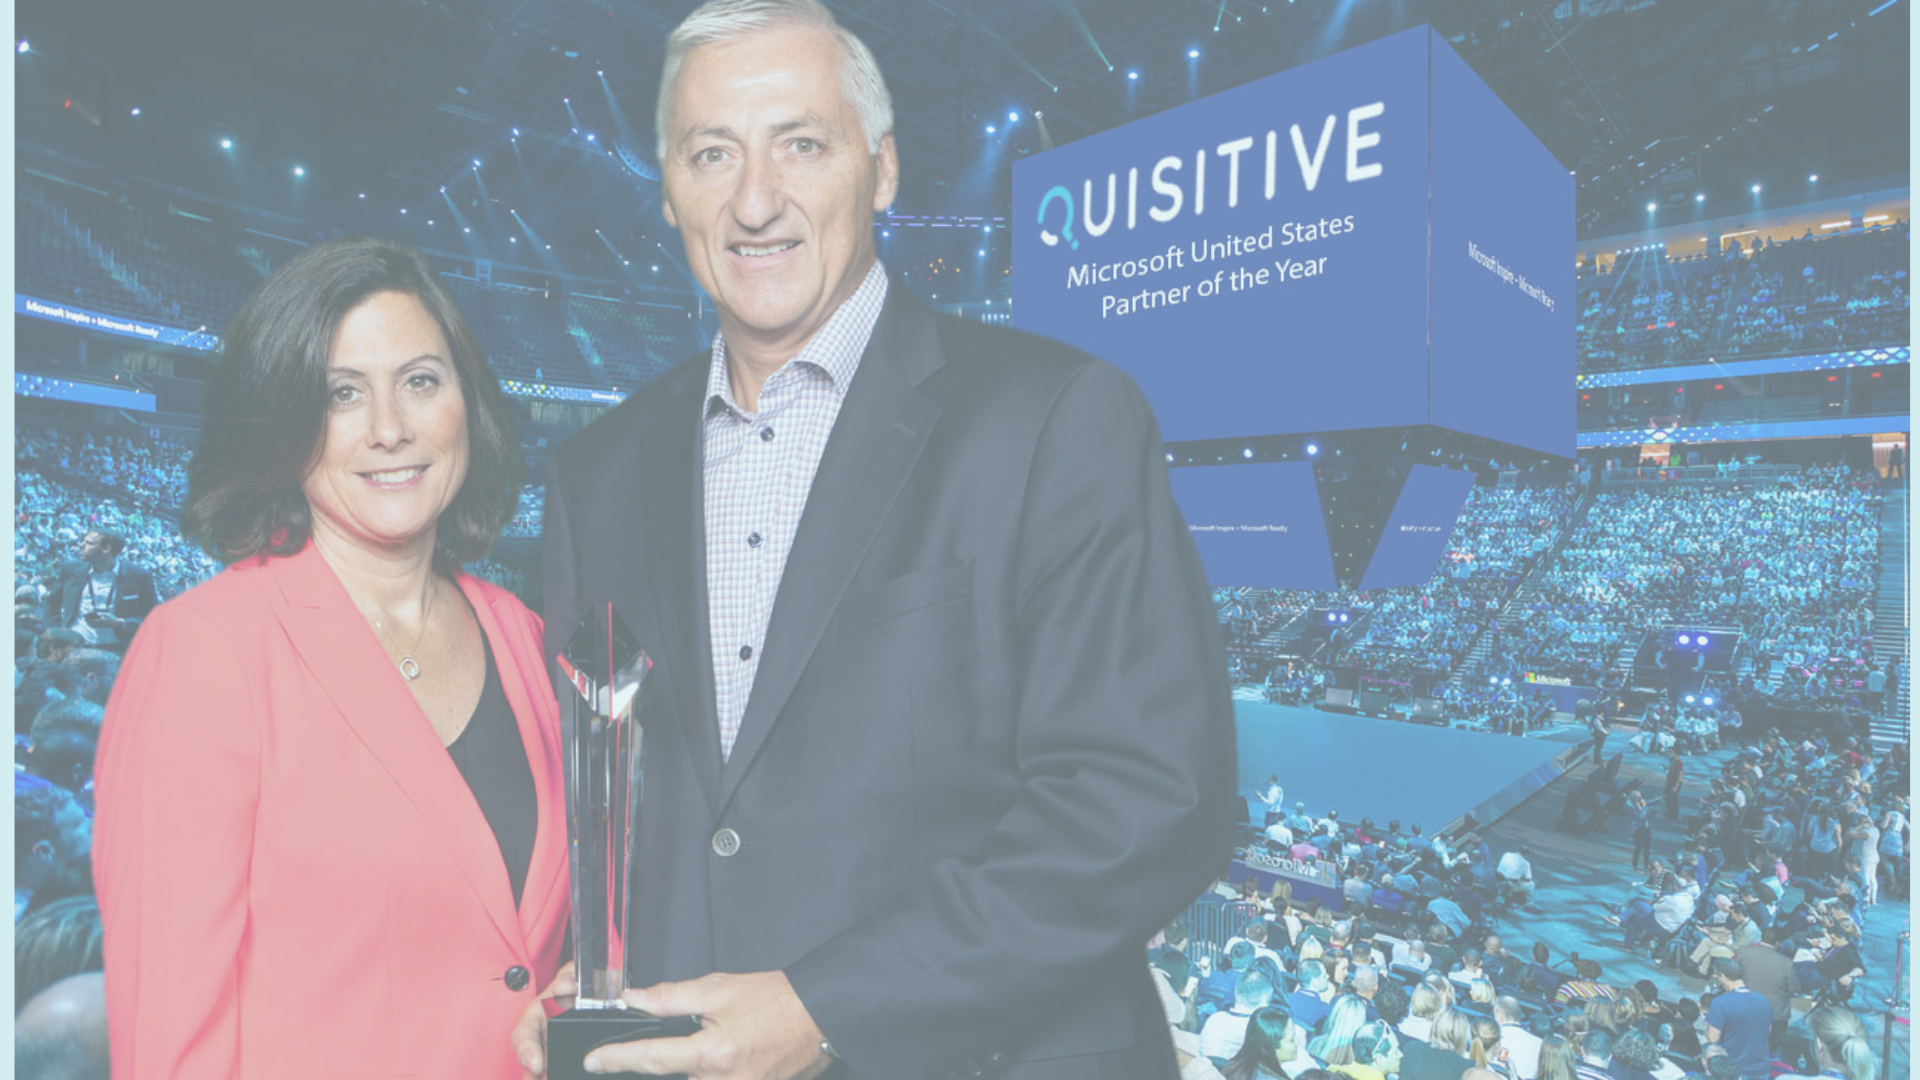 Image of CEO Mike Reinhart with Gavriella Schuster holding crystal award